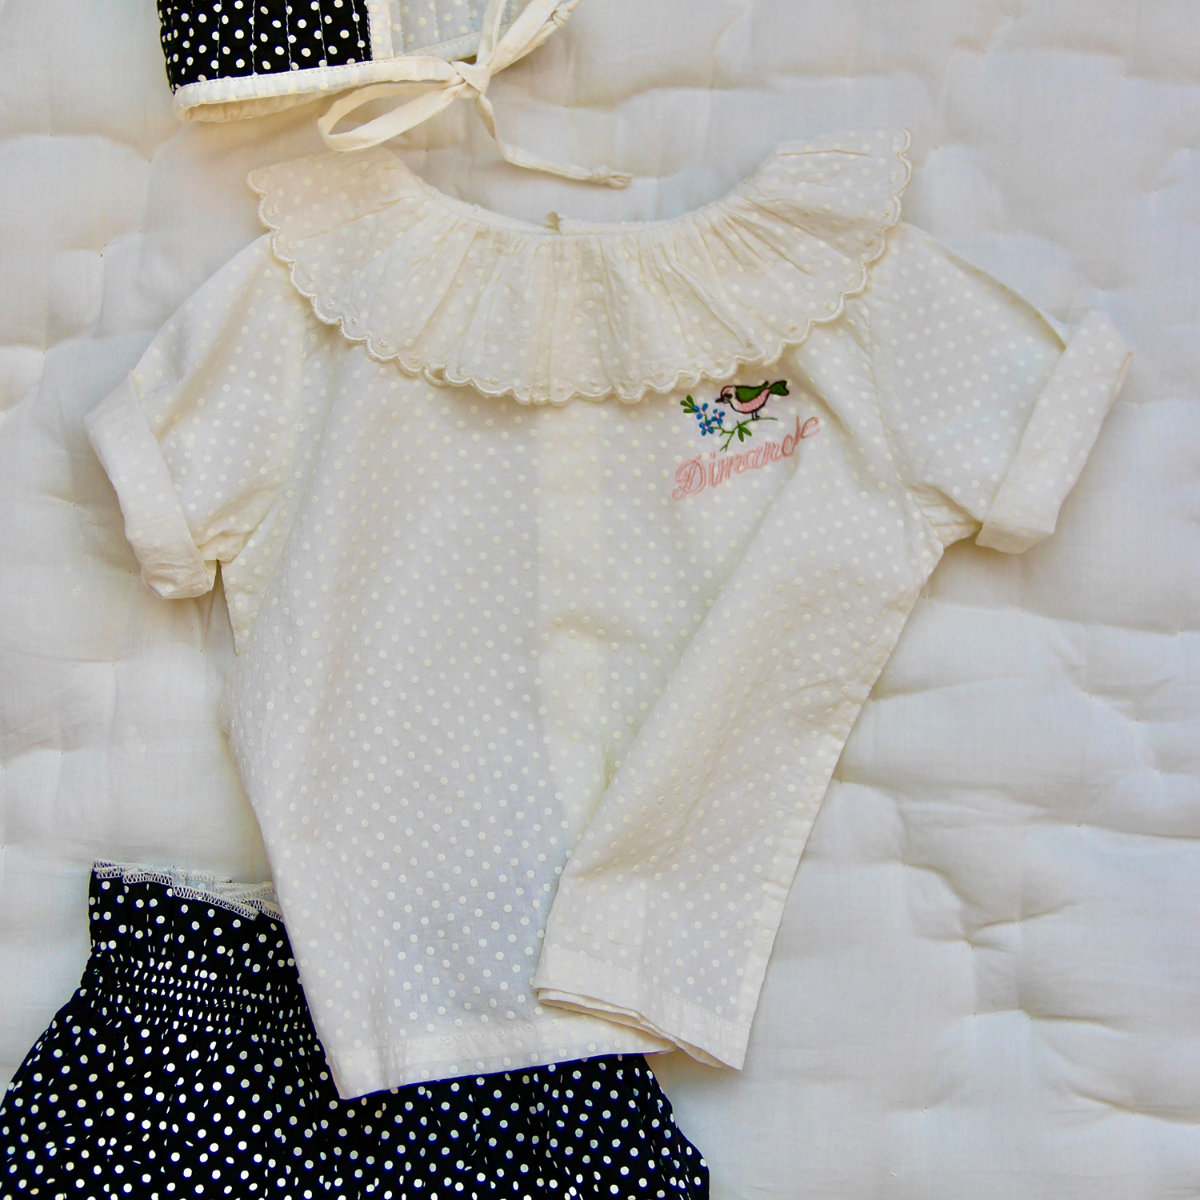 Baby flounce blouse with embroidery(Ecru dot voile)